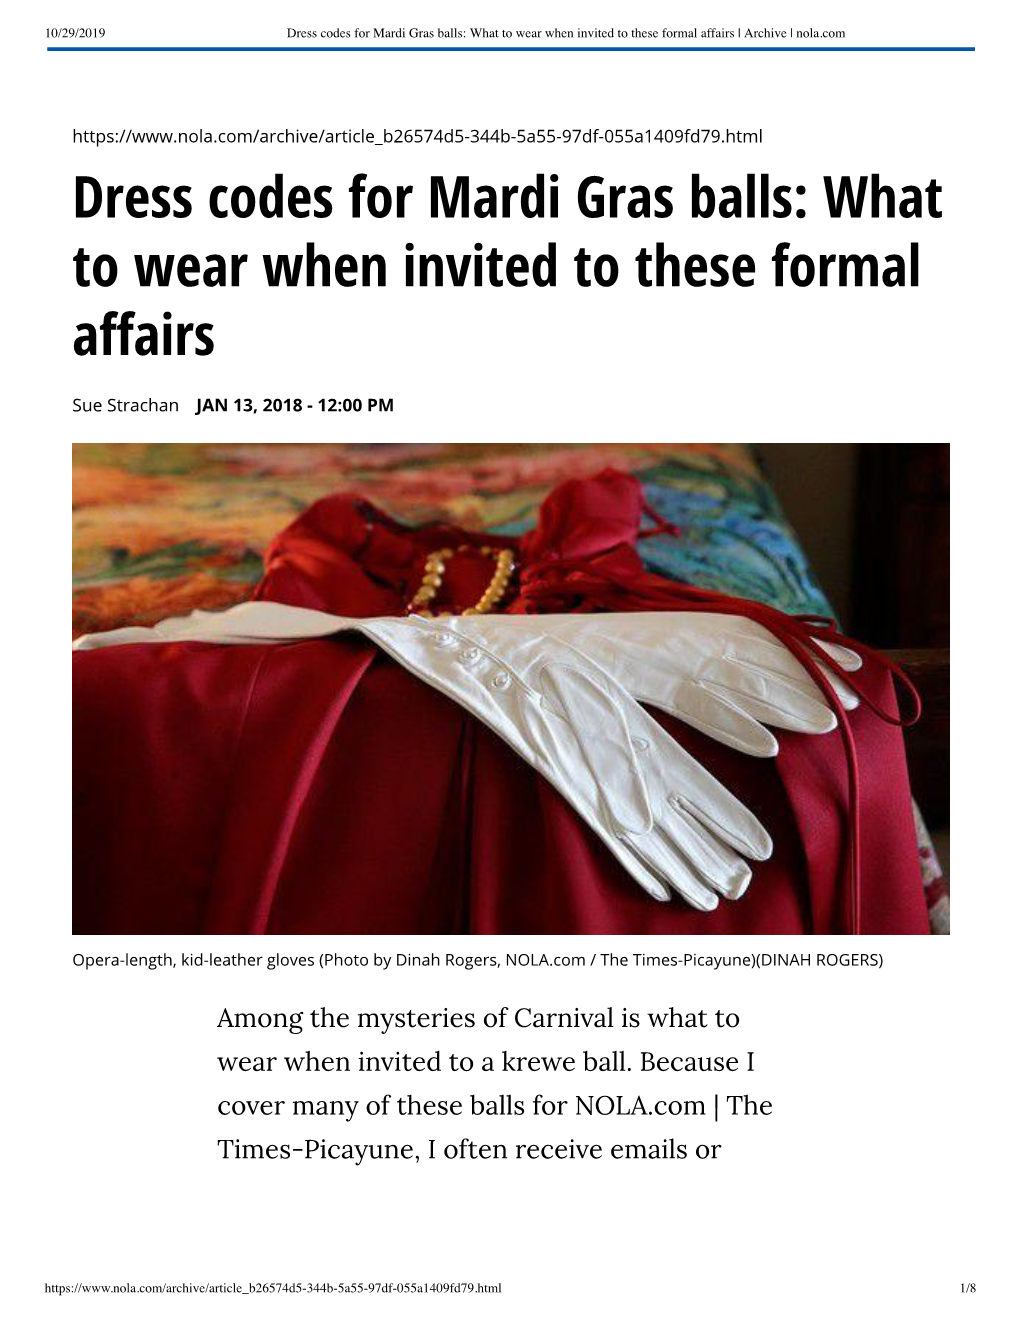 Dress Codes for Mardi Gras Balls: What to Wear When Invited to These Formal Affairs | Archive | Nola.Com